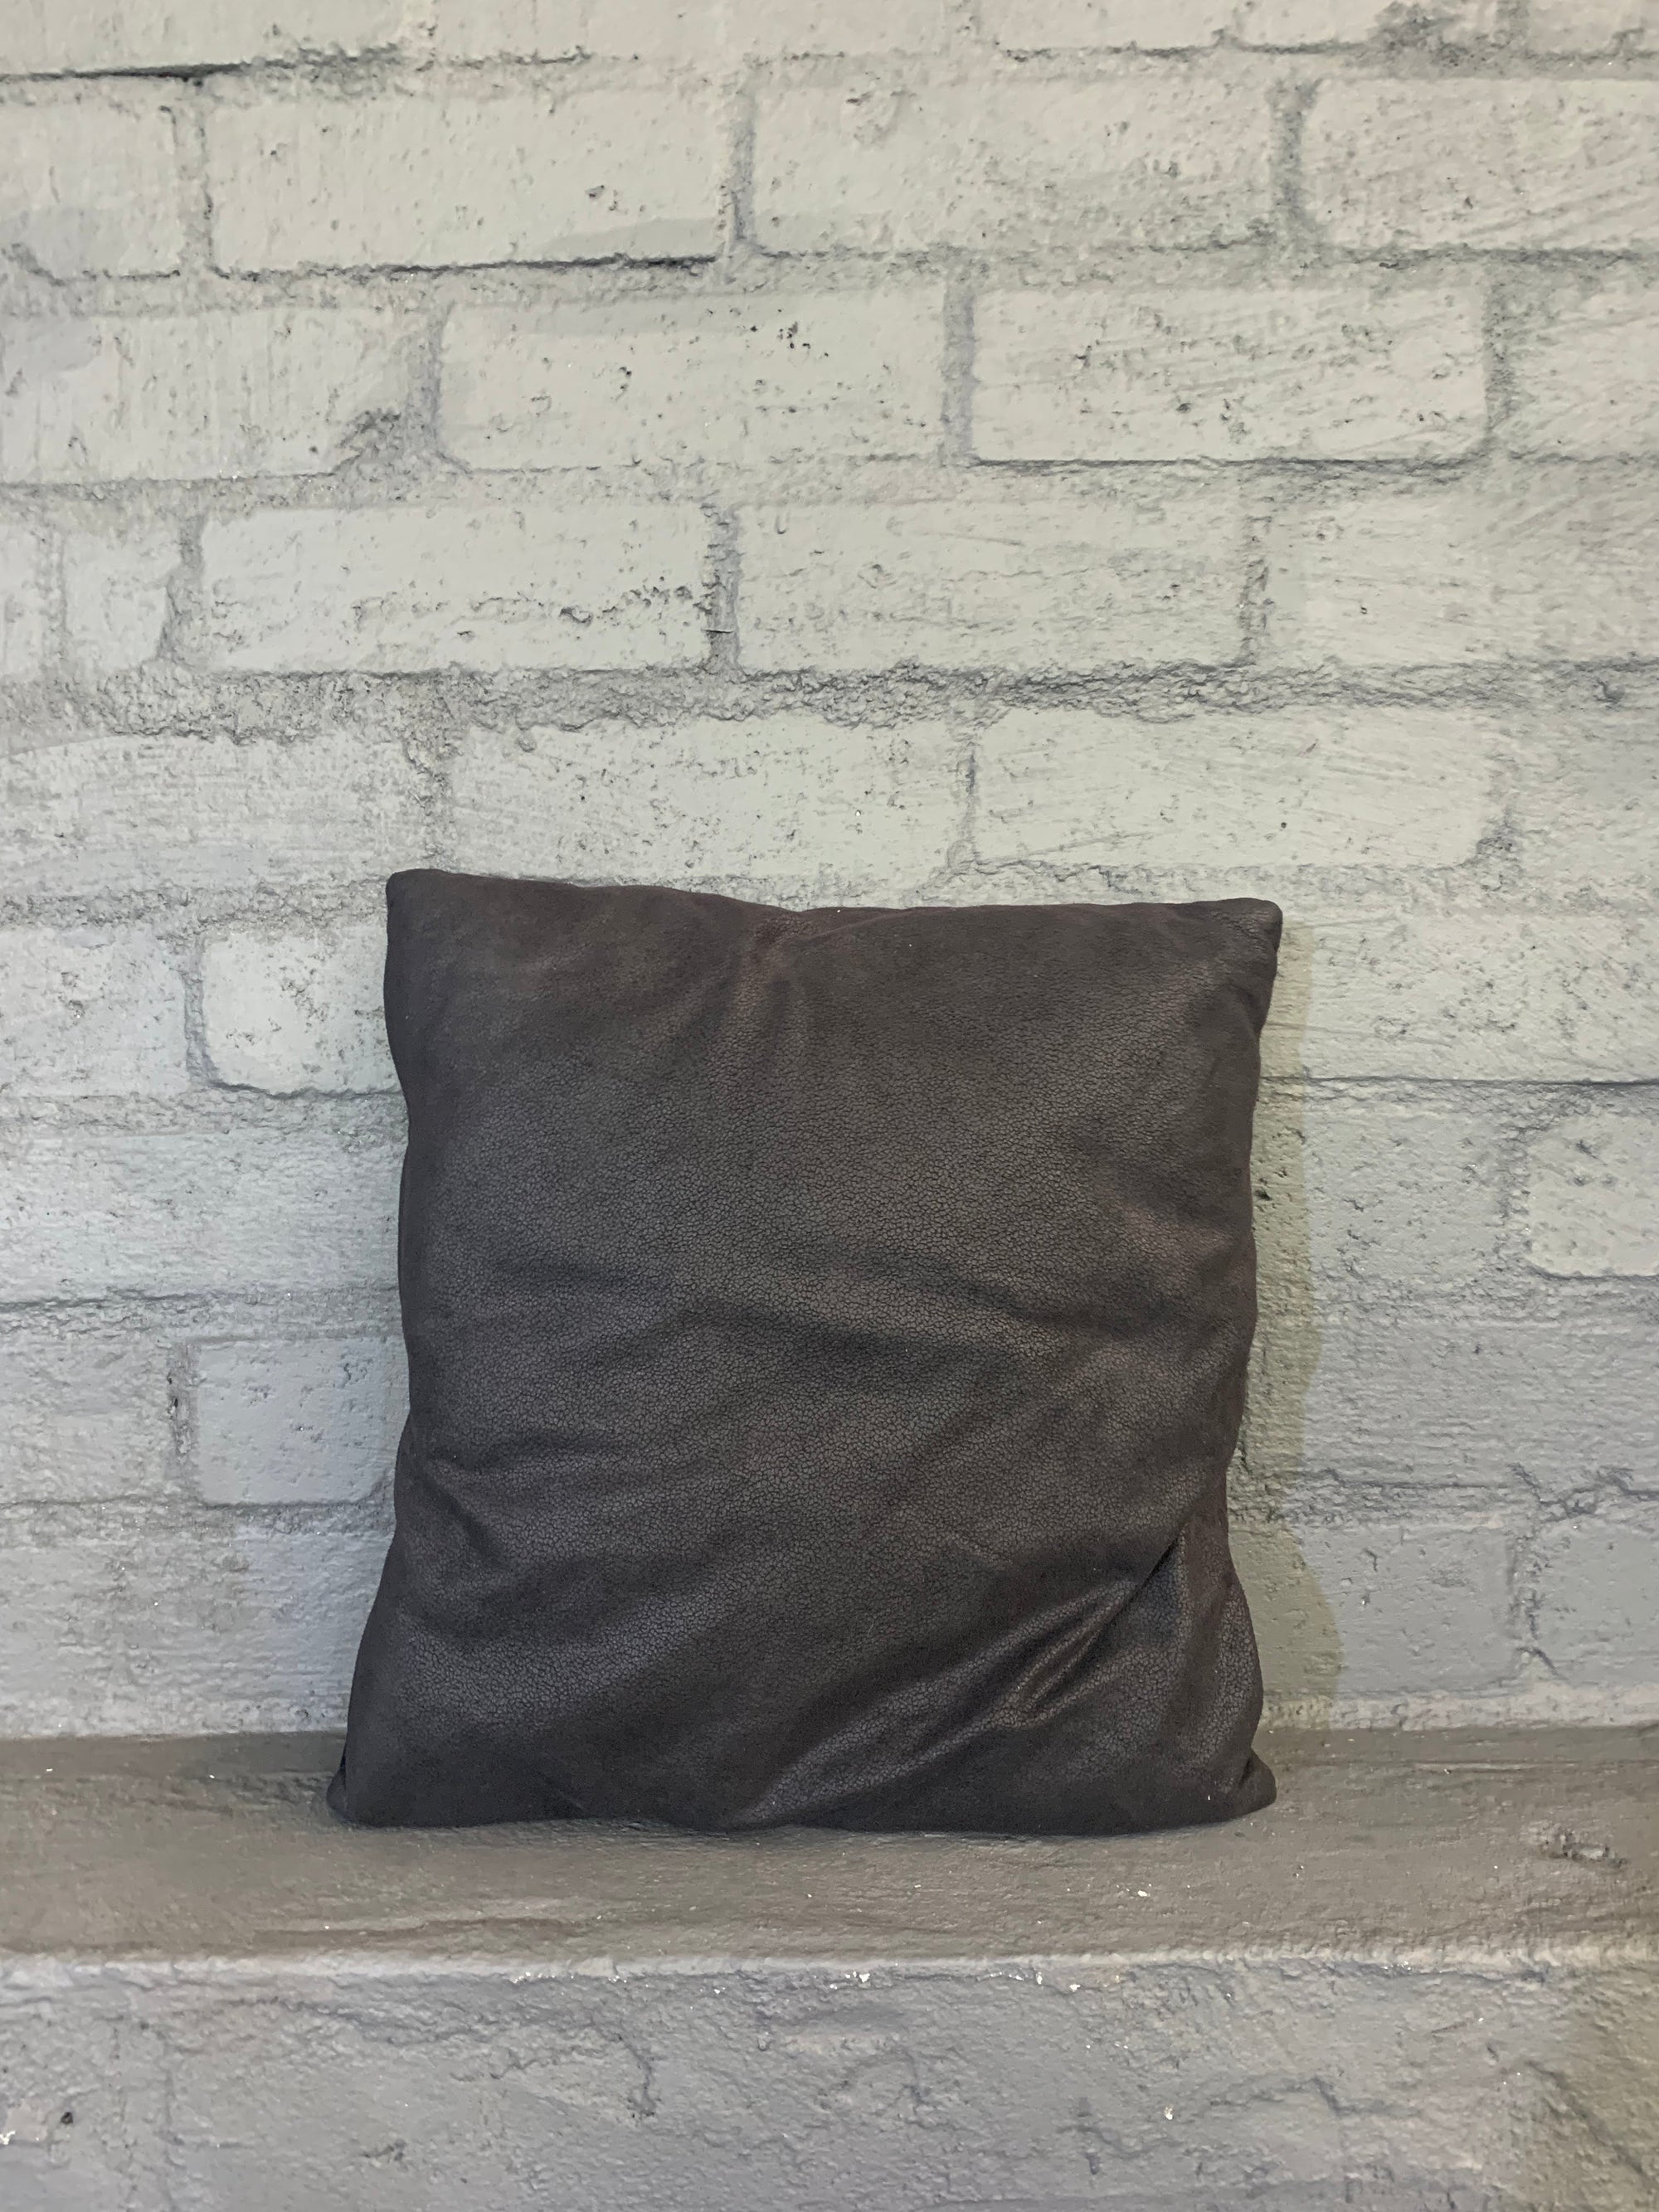 Small Pillow in Charcoal - 2ndhandwarehouse.com